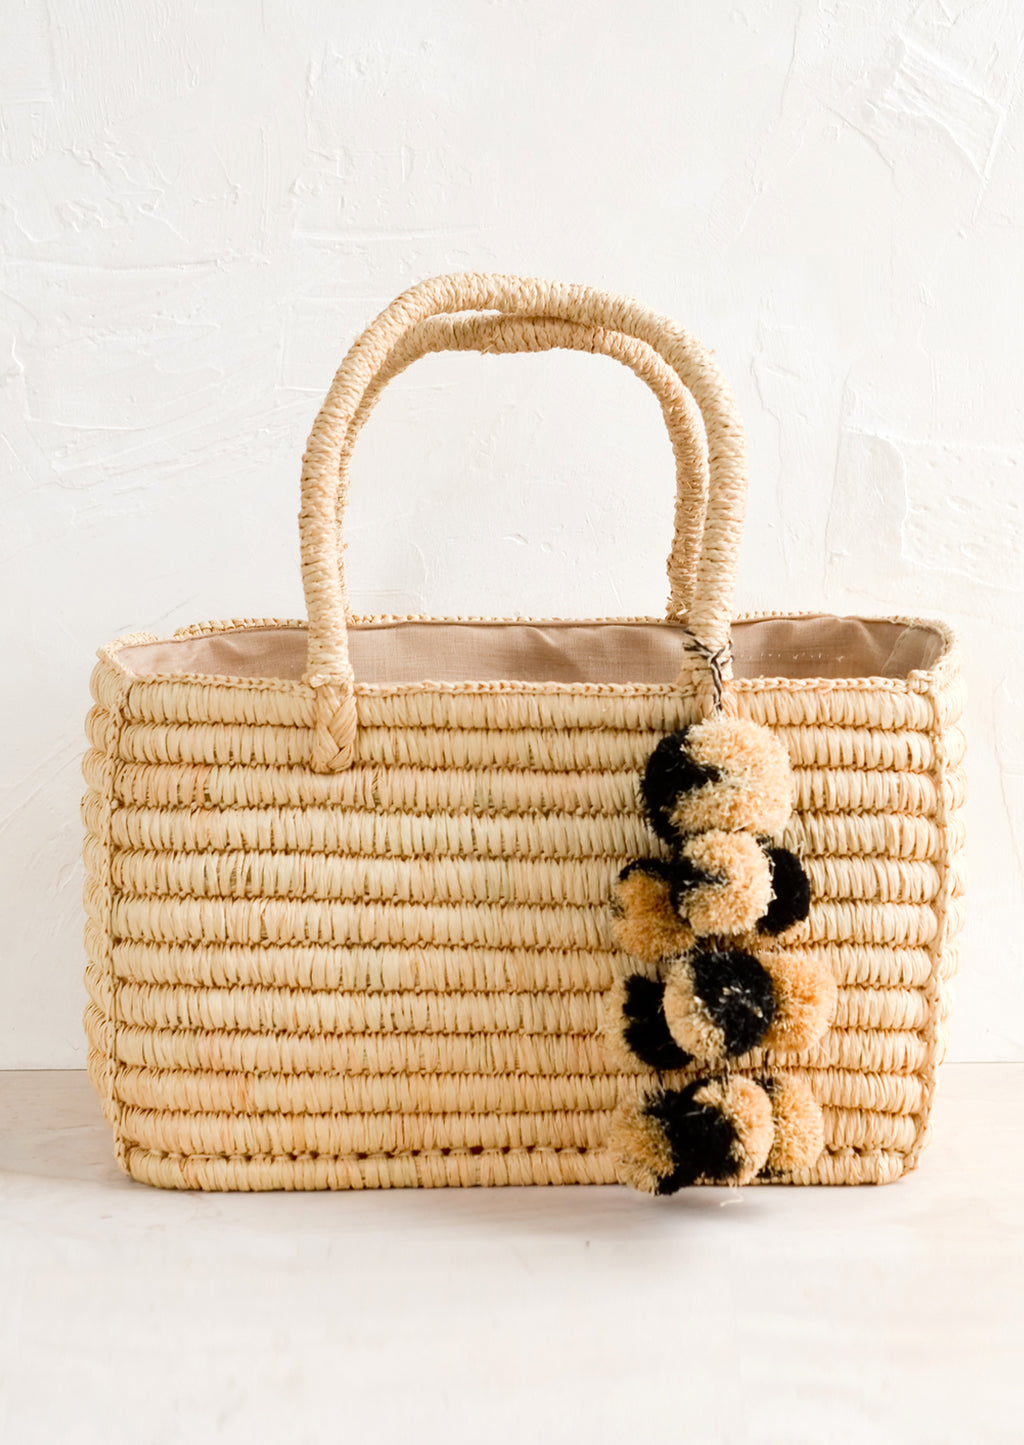 Natural: An east-west raffia tote in natural color with black & natural straw pom pom detailing.